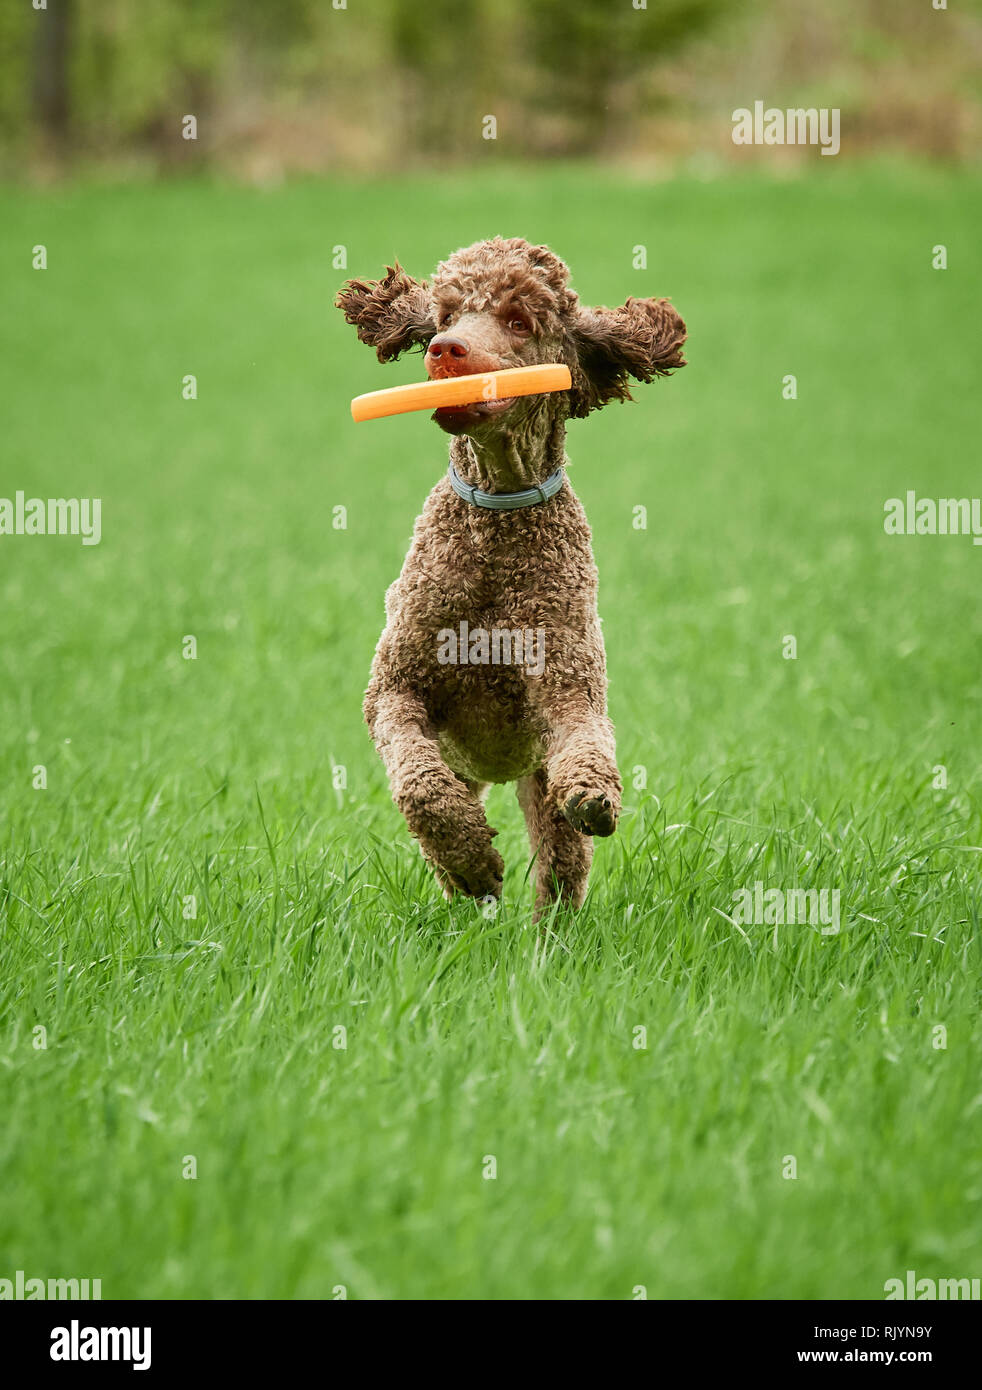 how to keep my standard poodle from jumping up